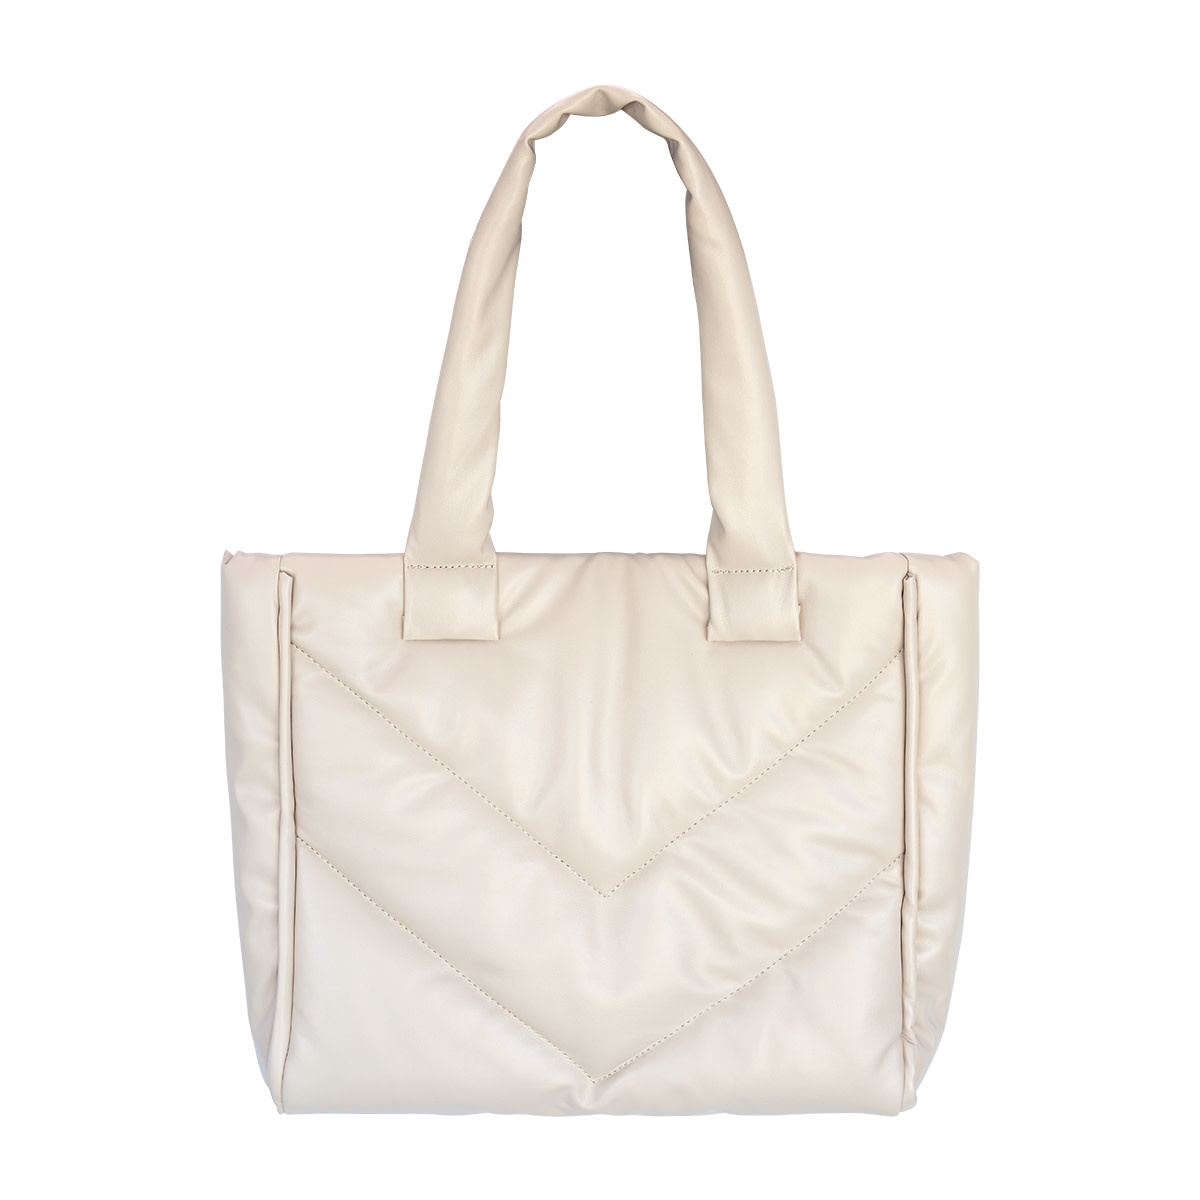 With love Quilted shopper bag - white 38cm x 30cm x 14cm